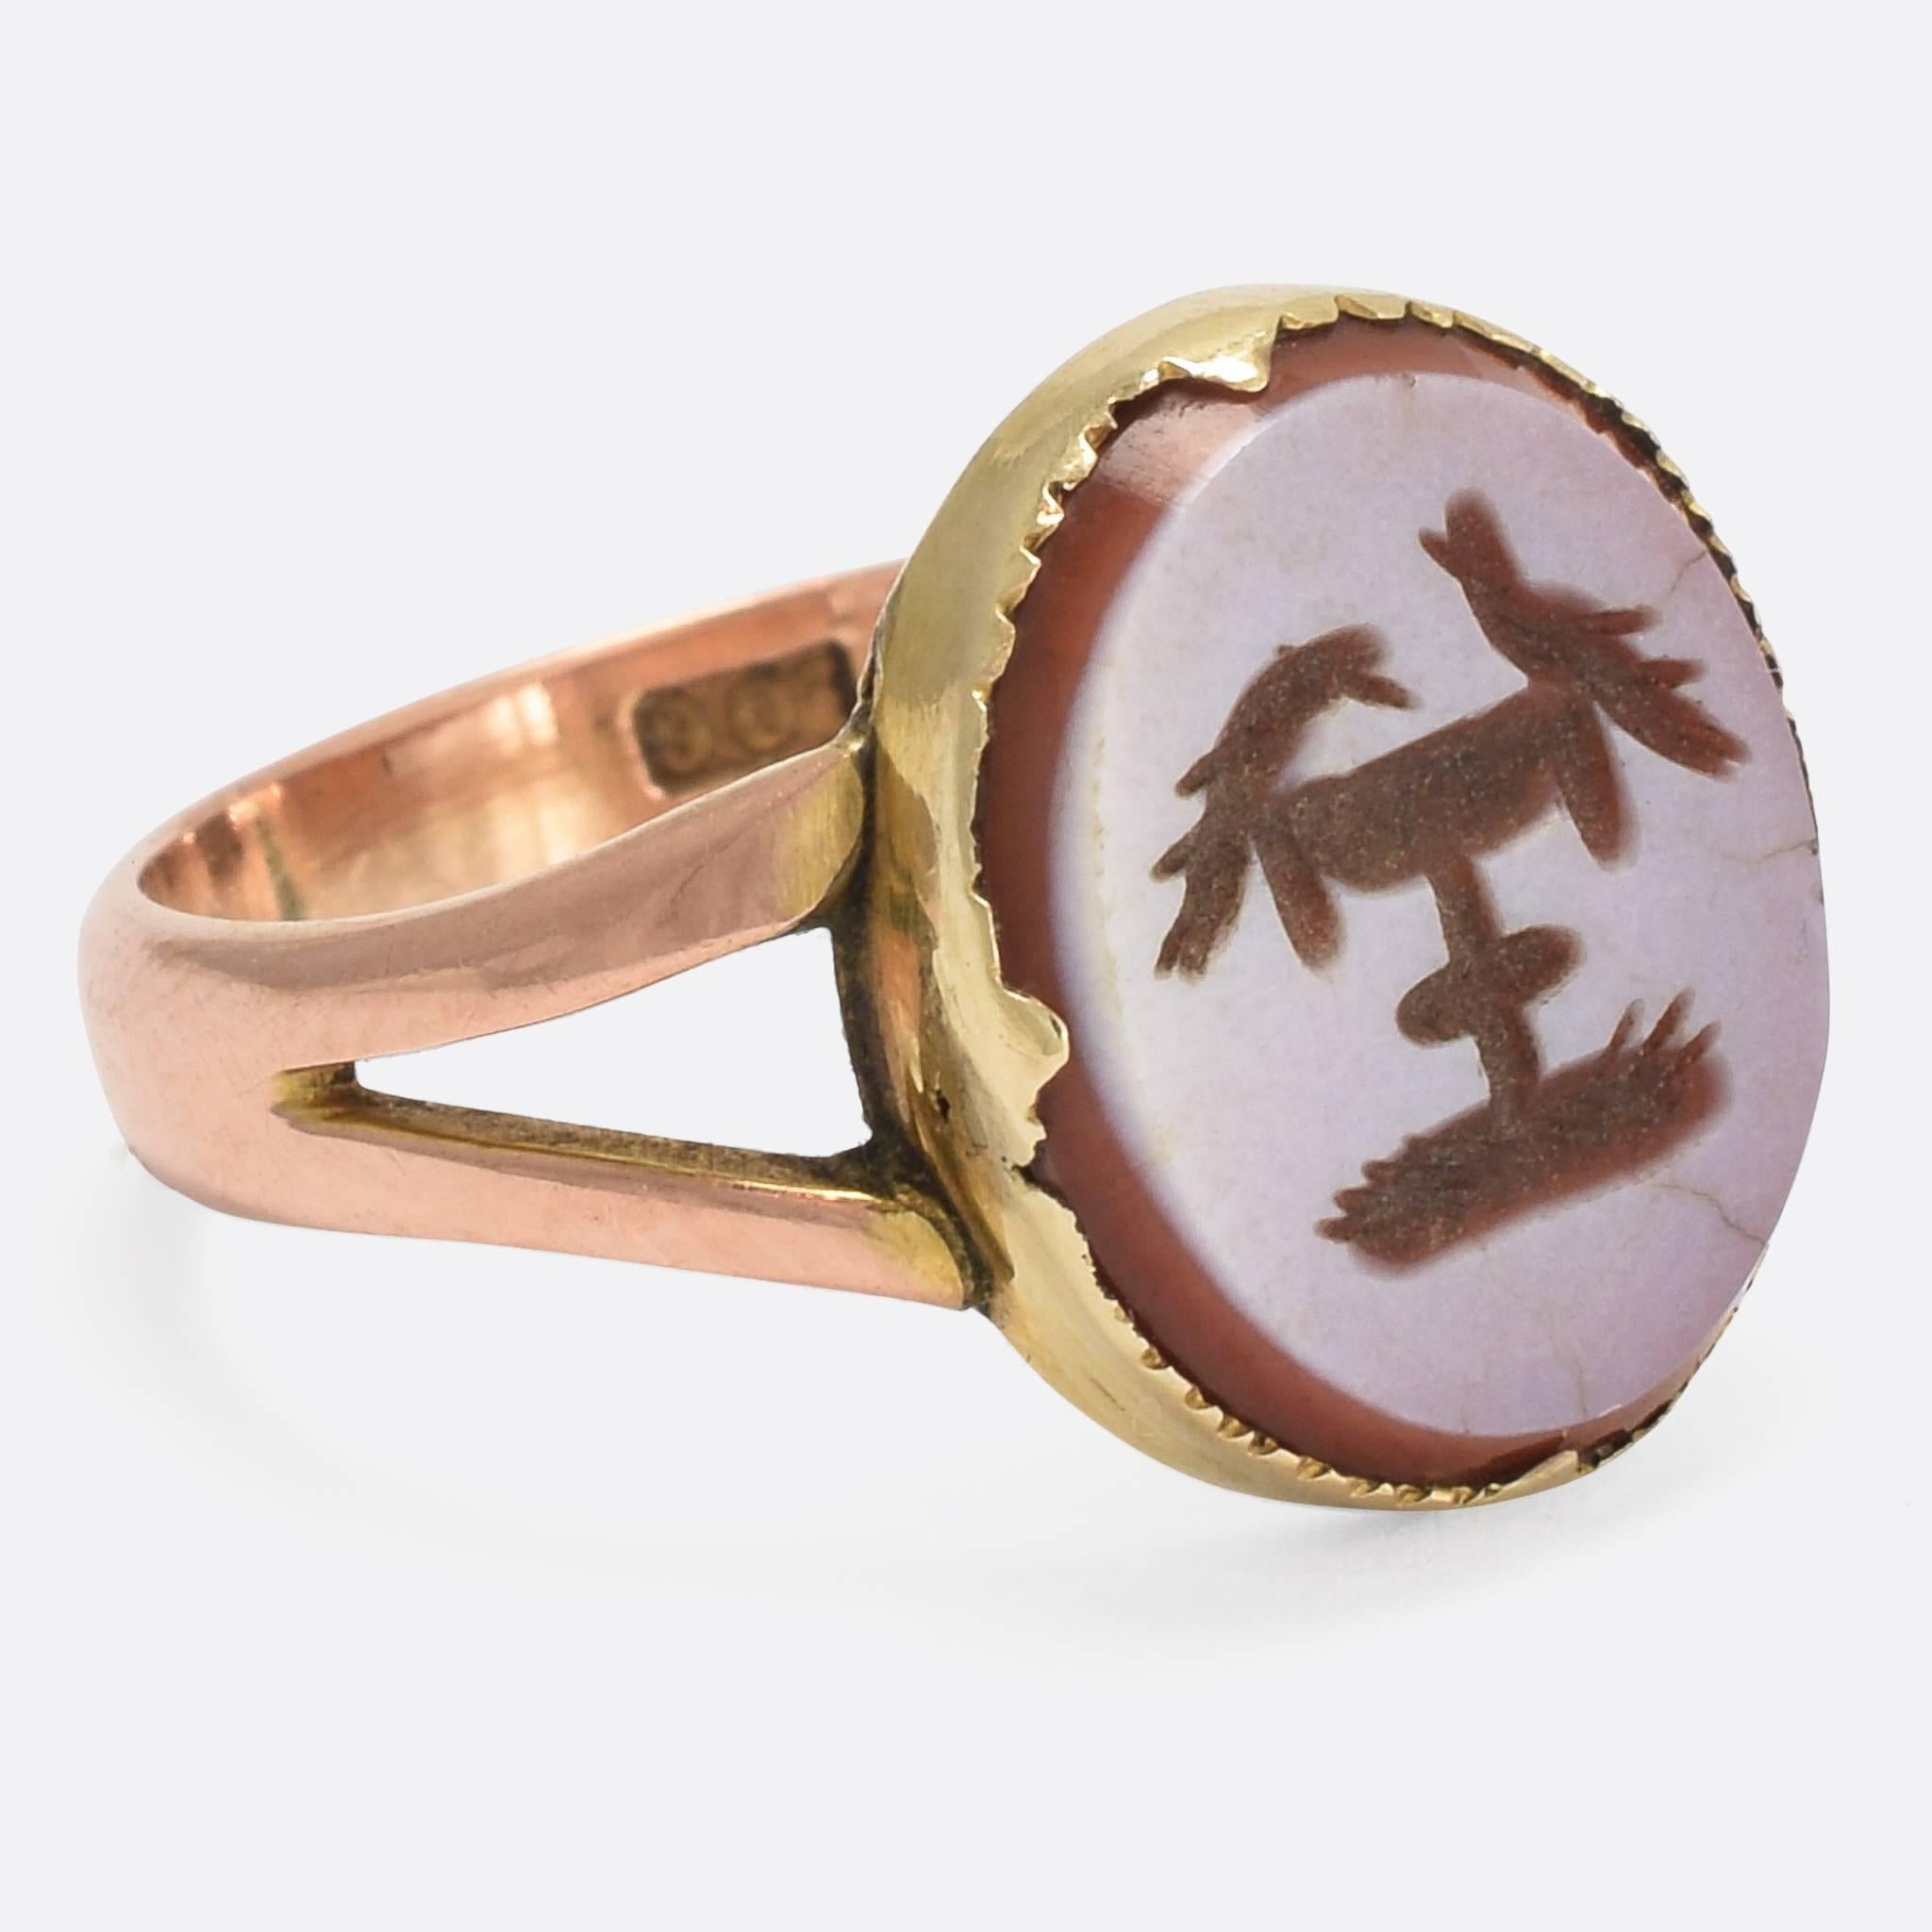 A wonderful early Victorian Signet Ring with sardonyx intaglio depicting the 